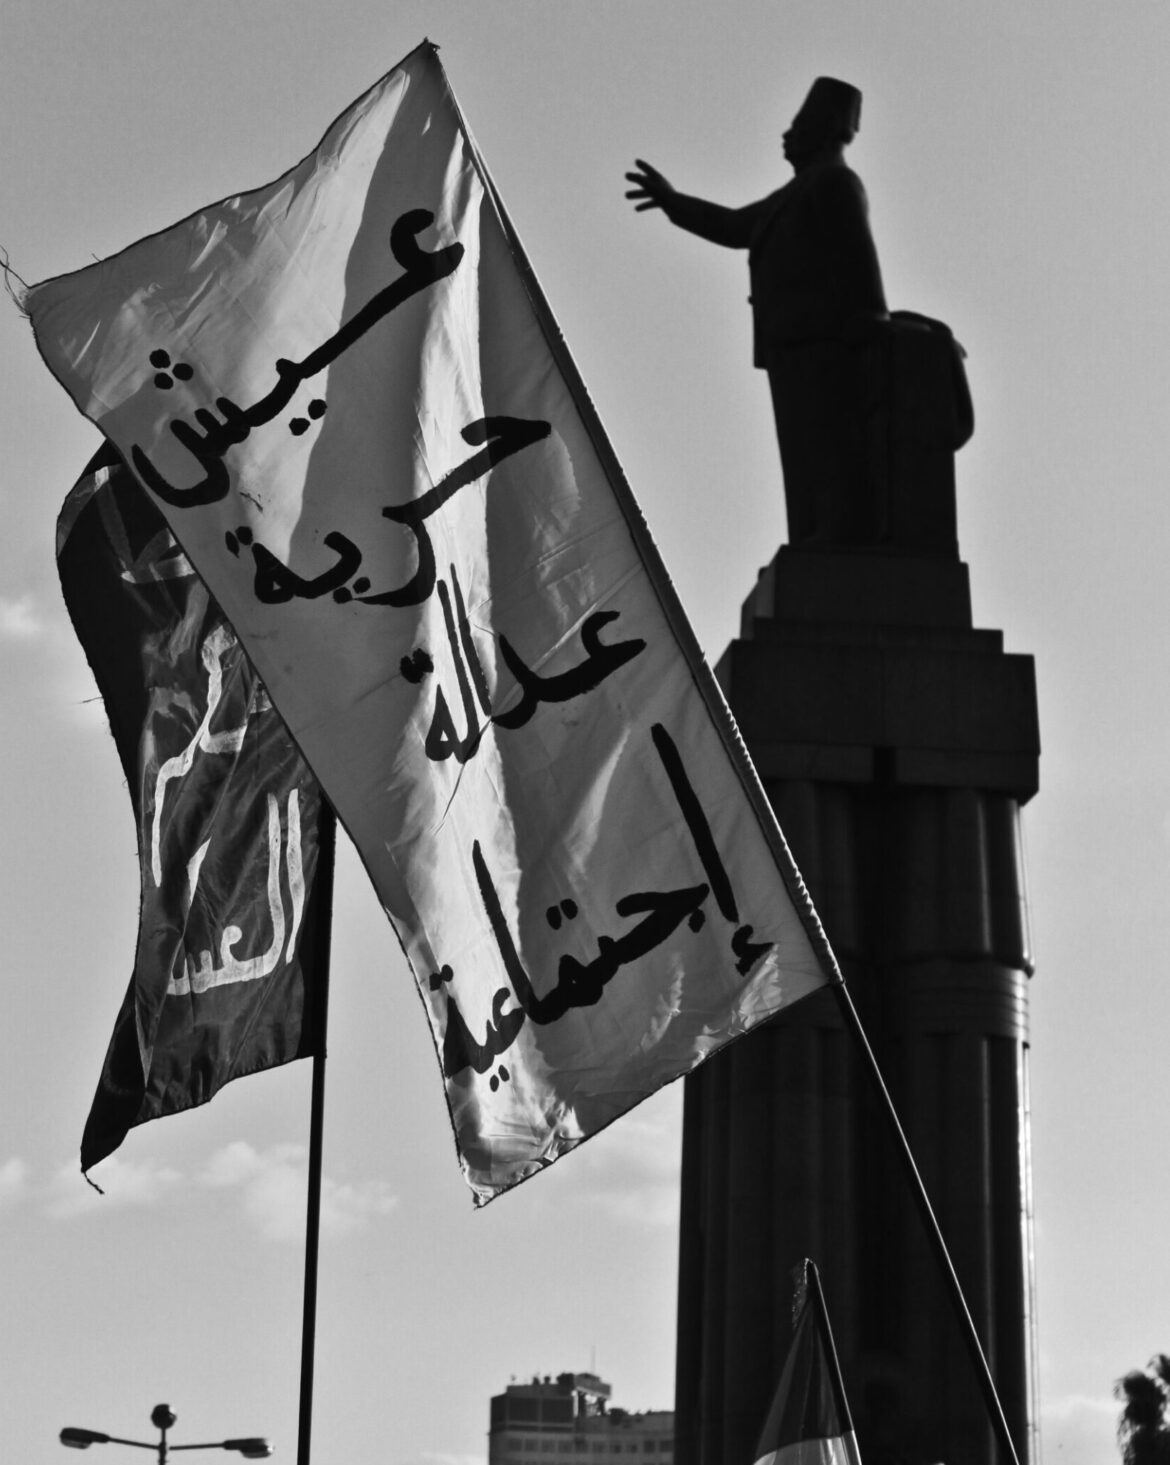 Revolutionary Discourse In the Arab Spring: Our Tools In the Deconstruction of Corruption